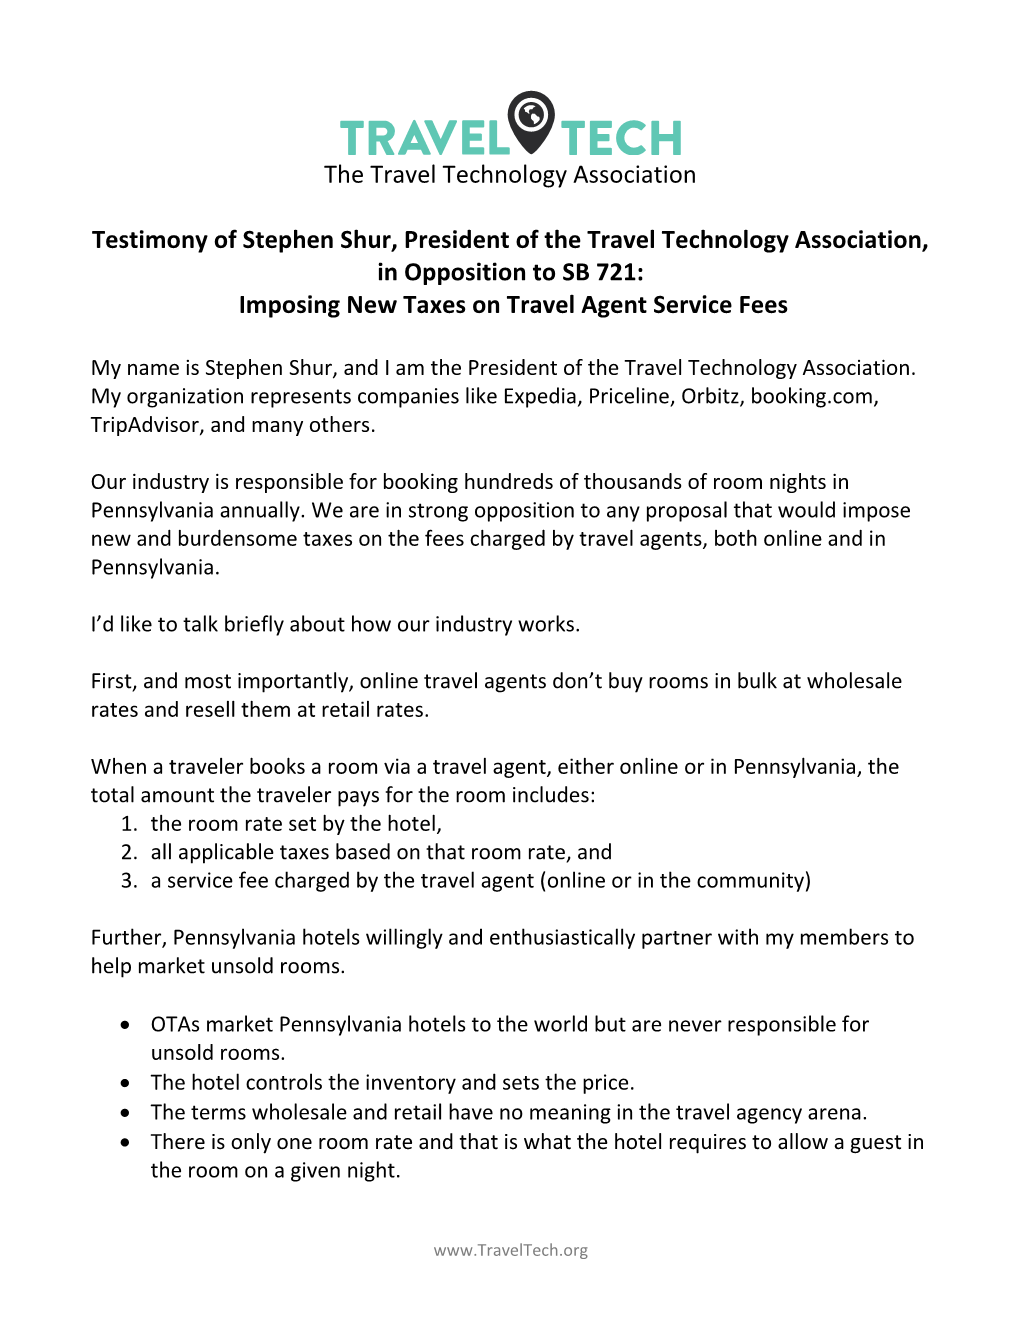 The Travel Technology Association Testimony of Stephen Shur, President of the Travel Technology Association, in Opposition to SB